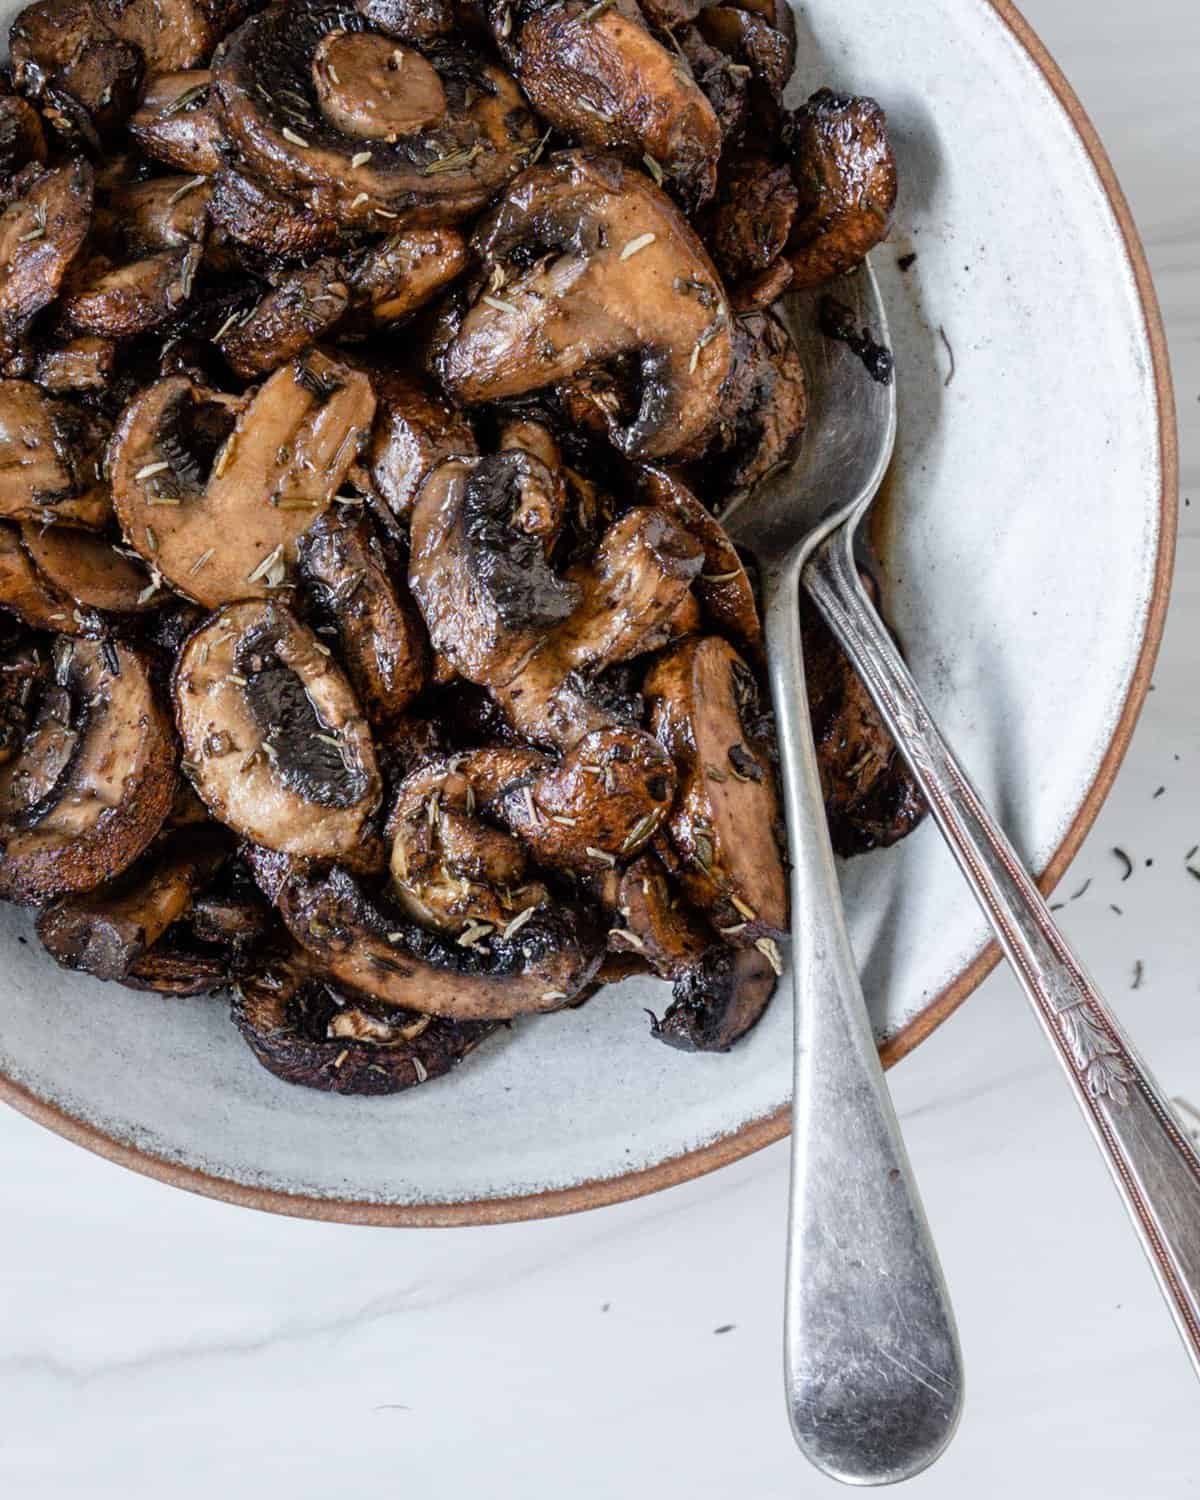 completed simple roasted mushrooms on a white plate against a white background